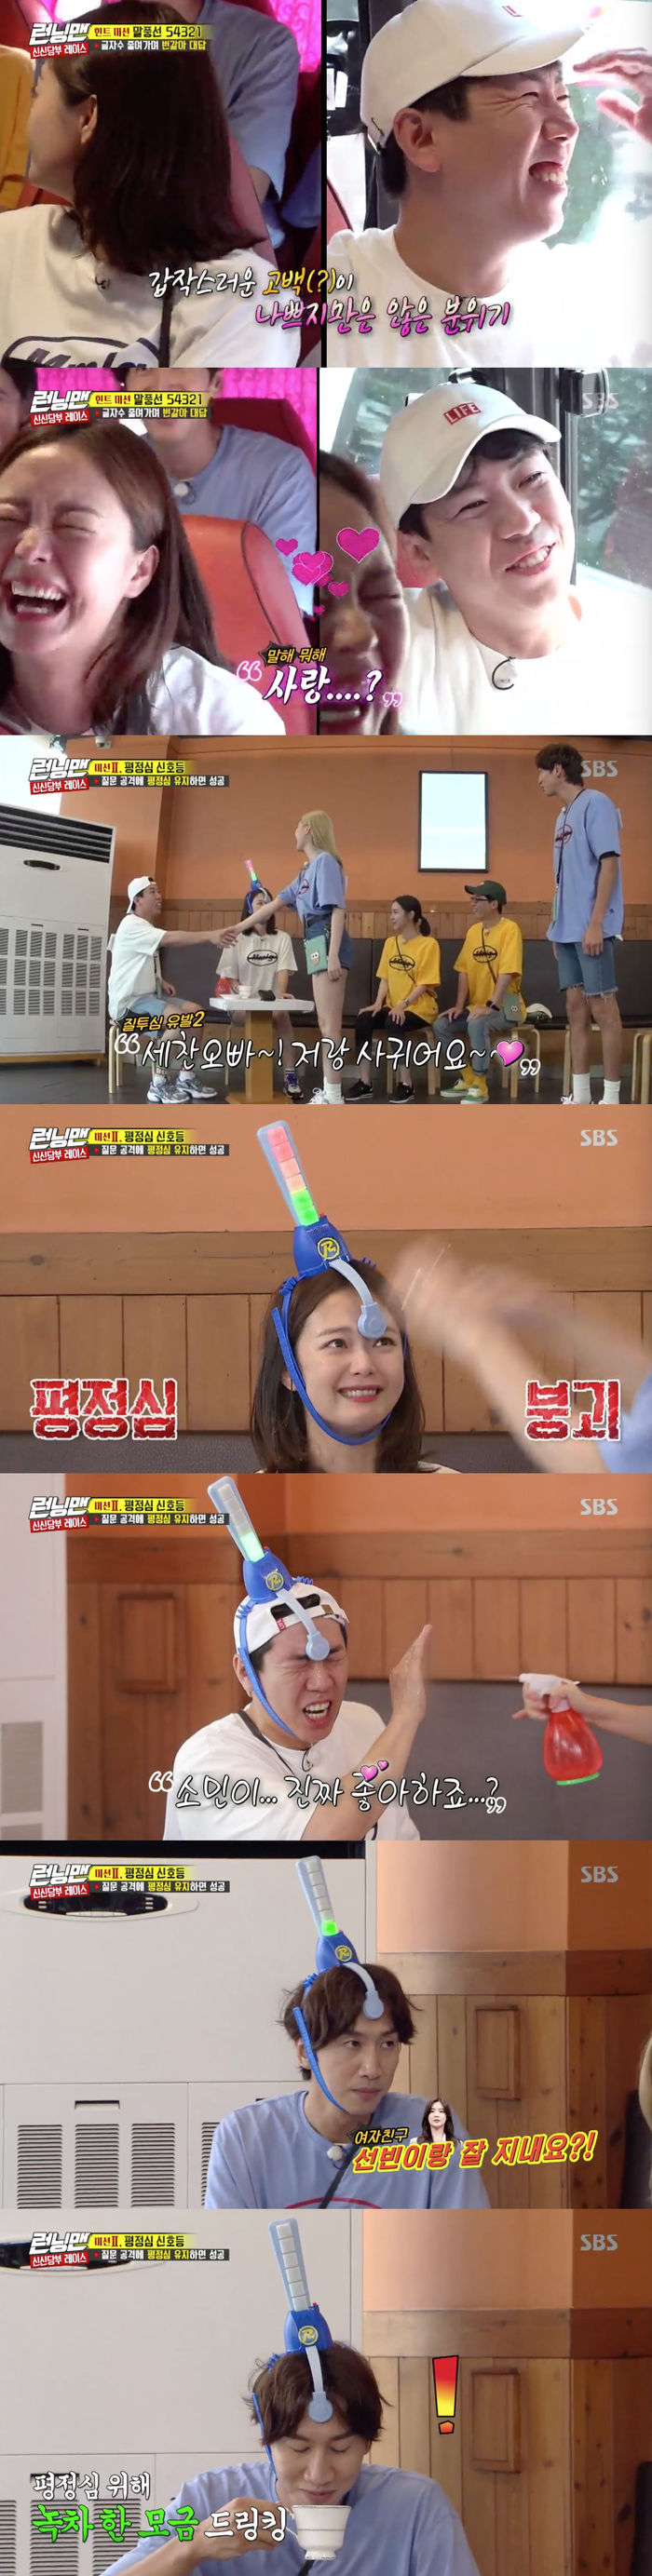 Will Jeon So-min and Yang Se-chan be the second Monday couple?On SBS Running Man broadcasted on the 1st, a new race was held to solve the prophecy written by the god of light and the god of darkness.On the show, the members teamed up into a couple to run a race, and among the members were the god of light, the god of darkness, and the prophet.The members had to protect the prophet to get a hint of the gods and only to help the god of light to out the god of darkness.The members then performed a mission to find the God of Darkness and the God Hint of Light; during the move, the members conducted the Horse Balloon 54321 Mission.The mission that succeeds only when you answer the question of the production team by reducing the number of letters.The crew asked Yang Se-chan and Jeon So-min couple questions.Asked what he wanted from his opponent, Jeon So-min replied Your heart and embarrassed Yang Se-chan.Yoo Jae-Suk said, Did you confess now? He said, If you repeat it, your mind may be like that without knowing it.The crew then asked Jeon So-min what he would do if Yang Se-chan asked him to date, so Jeon So-min replied, Of course I do.Yang Se-chan also said, I like it.Jeon So-min said Yang Se-chan was Treasure No. 1, and Yang Se-chan said that this years wish was love.Finally, Jeon So-min pretended to kiss Yang Se-chan, saying side about the nickname of Couple, and devastated the scene.In the active action of Jeon So-min, Yang Se-chan said, Brother, well get off, and Kim said, Go two, go two.Yoo Jae-Suk and Lee Kwang-soo shared sympathy with both Jeon So-min and Yang Se-chan, saying This is a fantasy tikitaka, Honaudu and Messi are in one team.Since then, Jeon So-min has challenged the mission to remain calm in questioning attacks.Jeon So-min did not maintain his composure with the questions of Stern, I like you, I want to go with you, etc.When asked if he really liked Jeon So-min, Yang Se-chan kept his eyes on him with a sudden calm, but he could not keep his composure, making everyone feel uncomfortable.Also, Lee Kwang-soo completely lost his composure when asked how he was doing well with Couple Lee Sun-bin.And Kim Jong Kook lost his composure to the love line attacks of Haha and Ji Seok Jin, and angered Sunny.